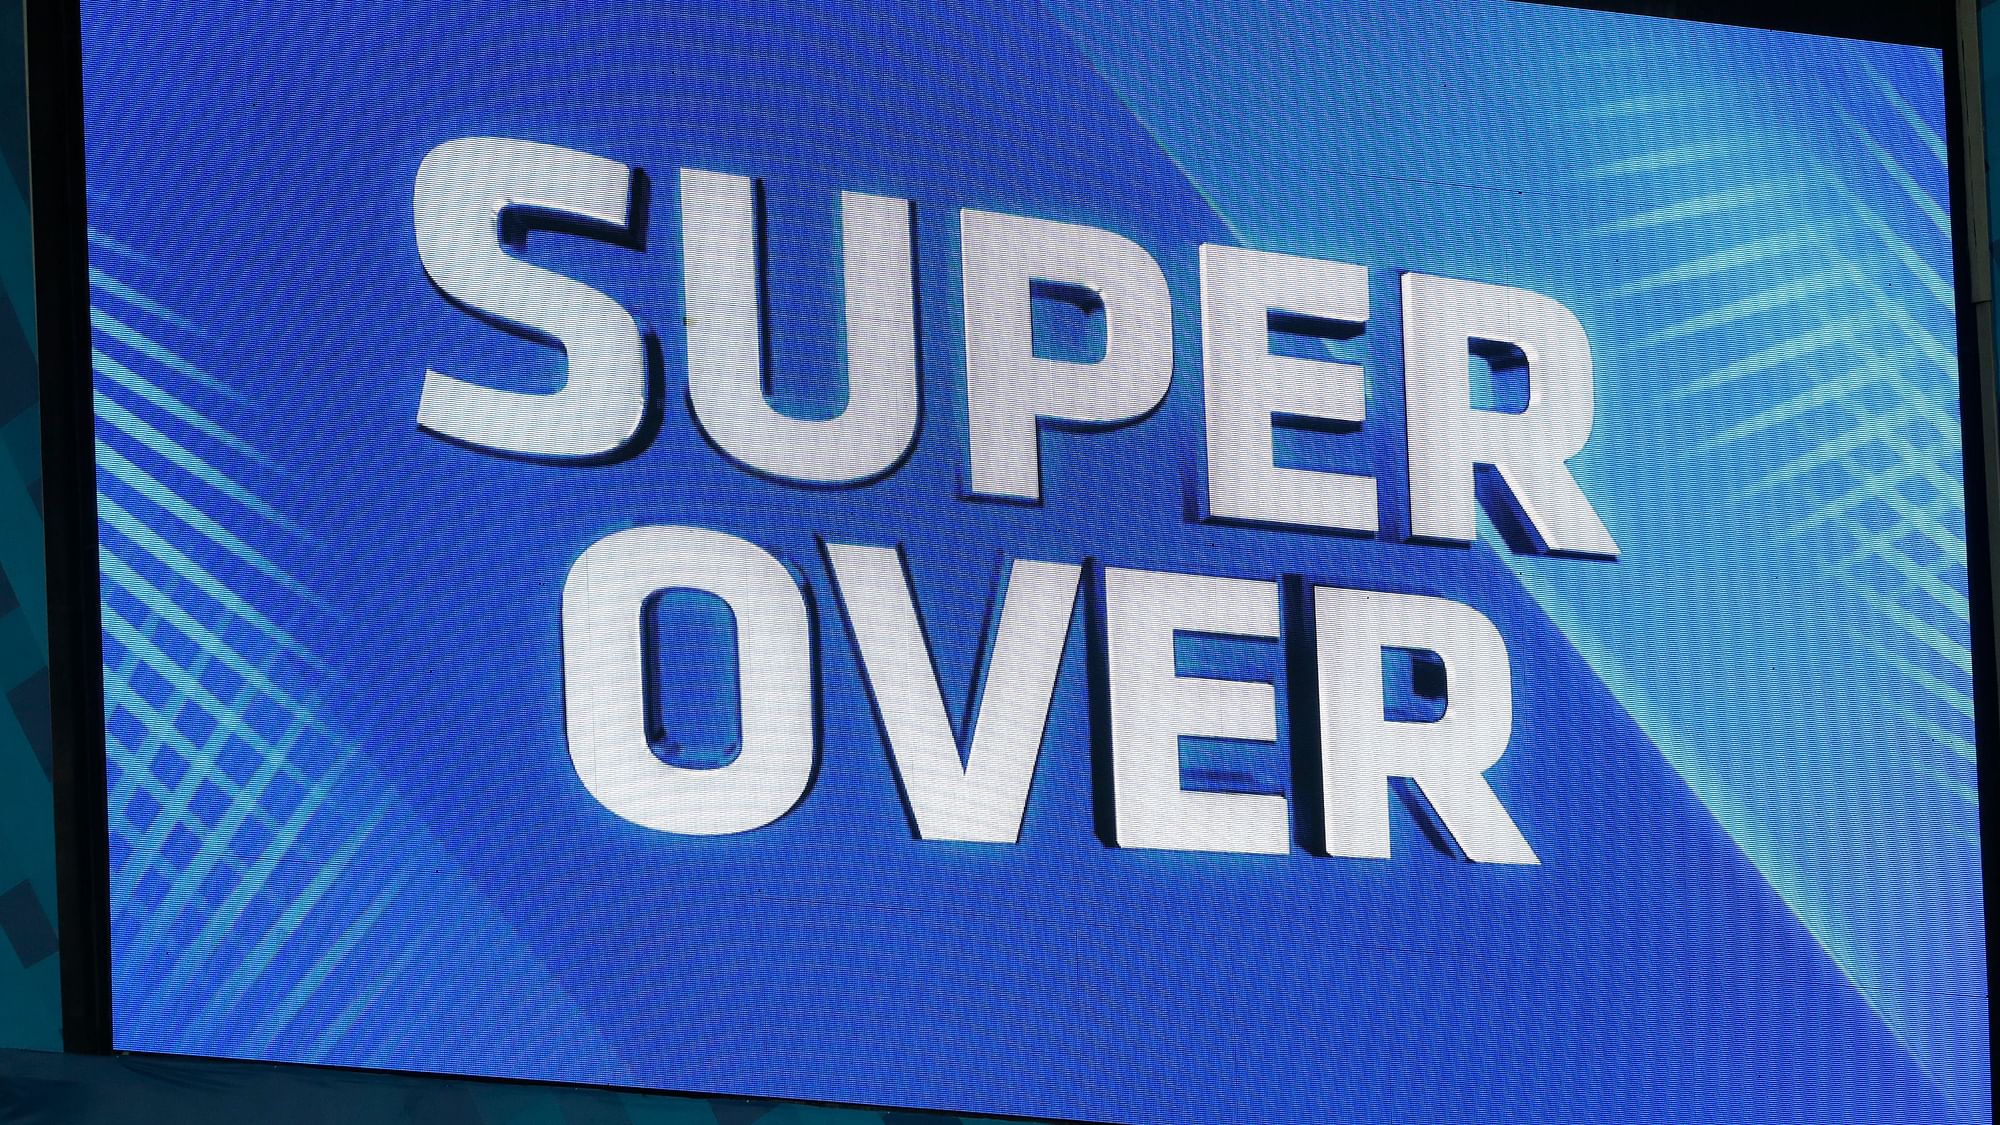 An unlimited number of Super Overs can be bowled until a winner is identified.